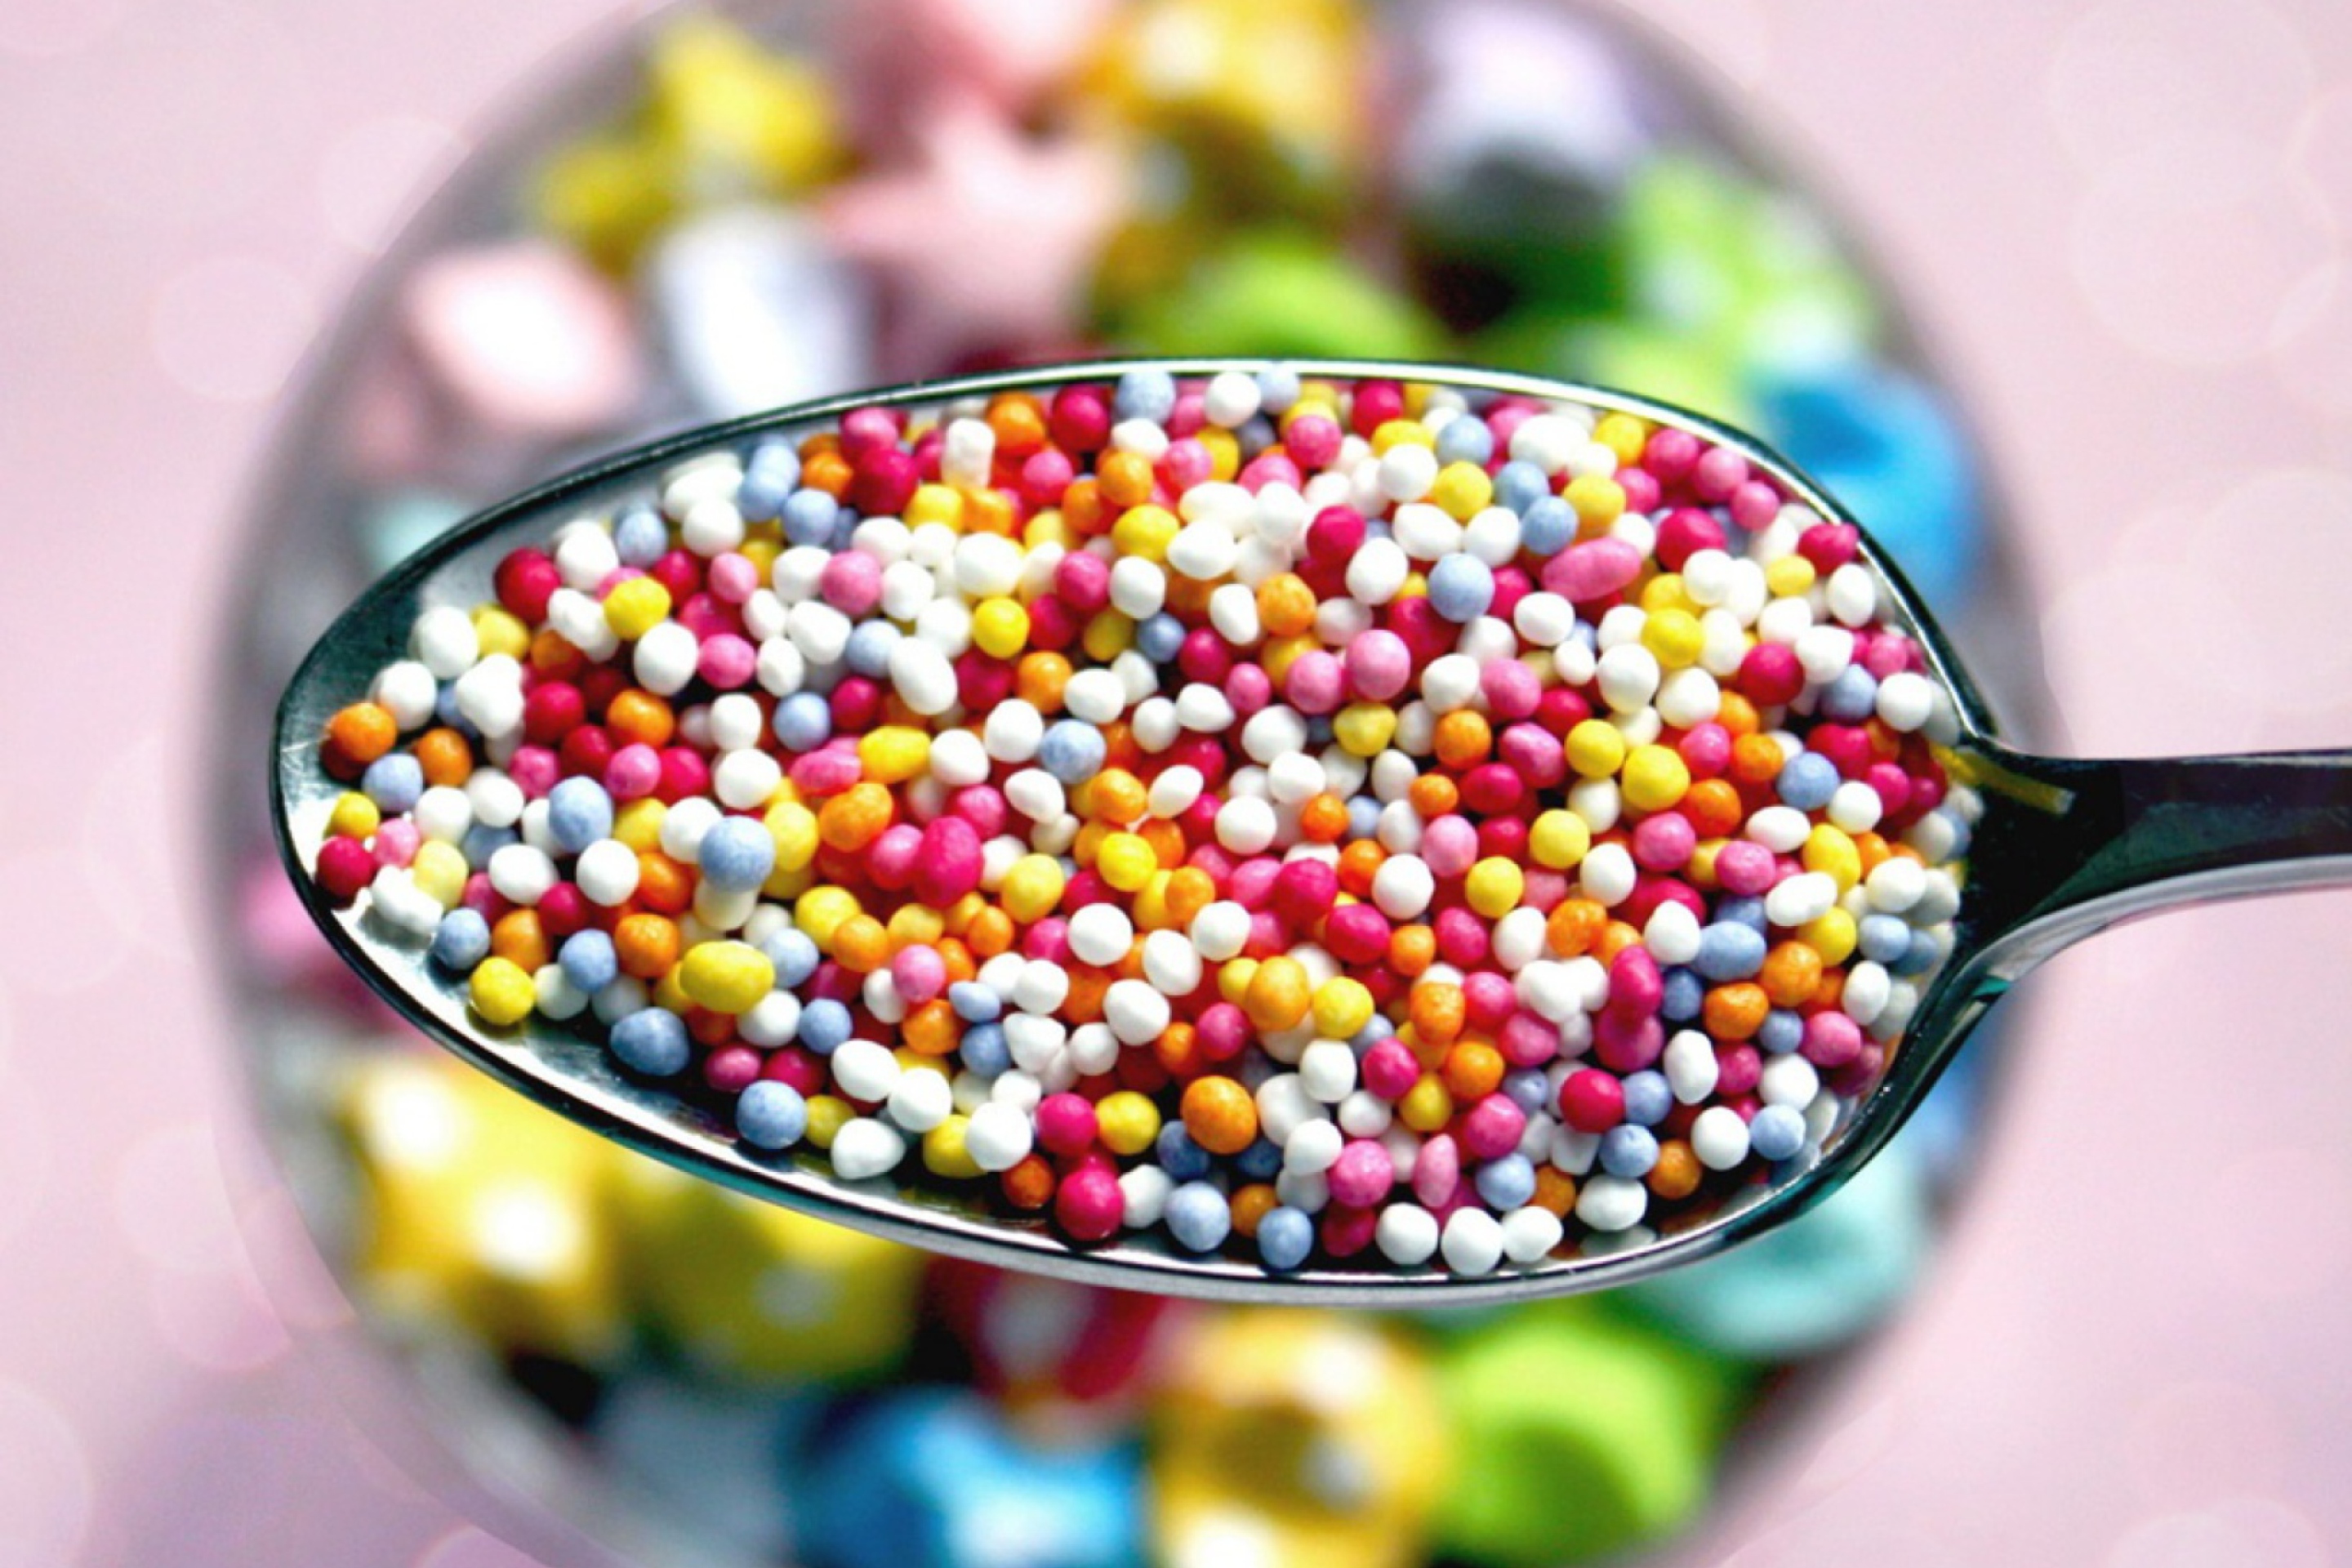 Colorful Candies wallpaper 2880x1920